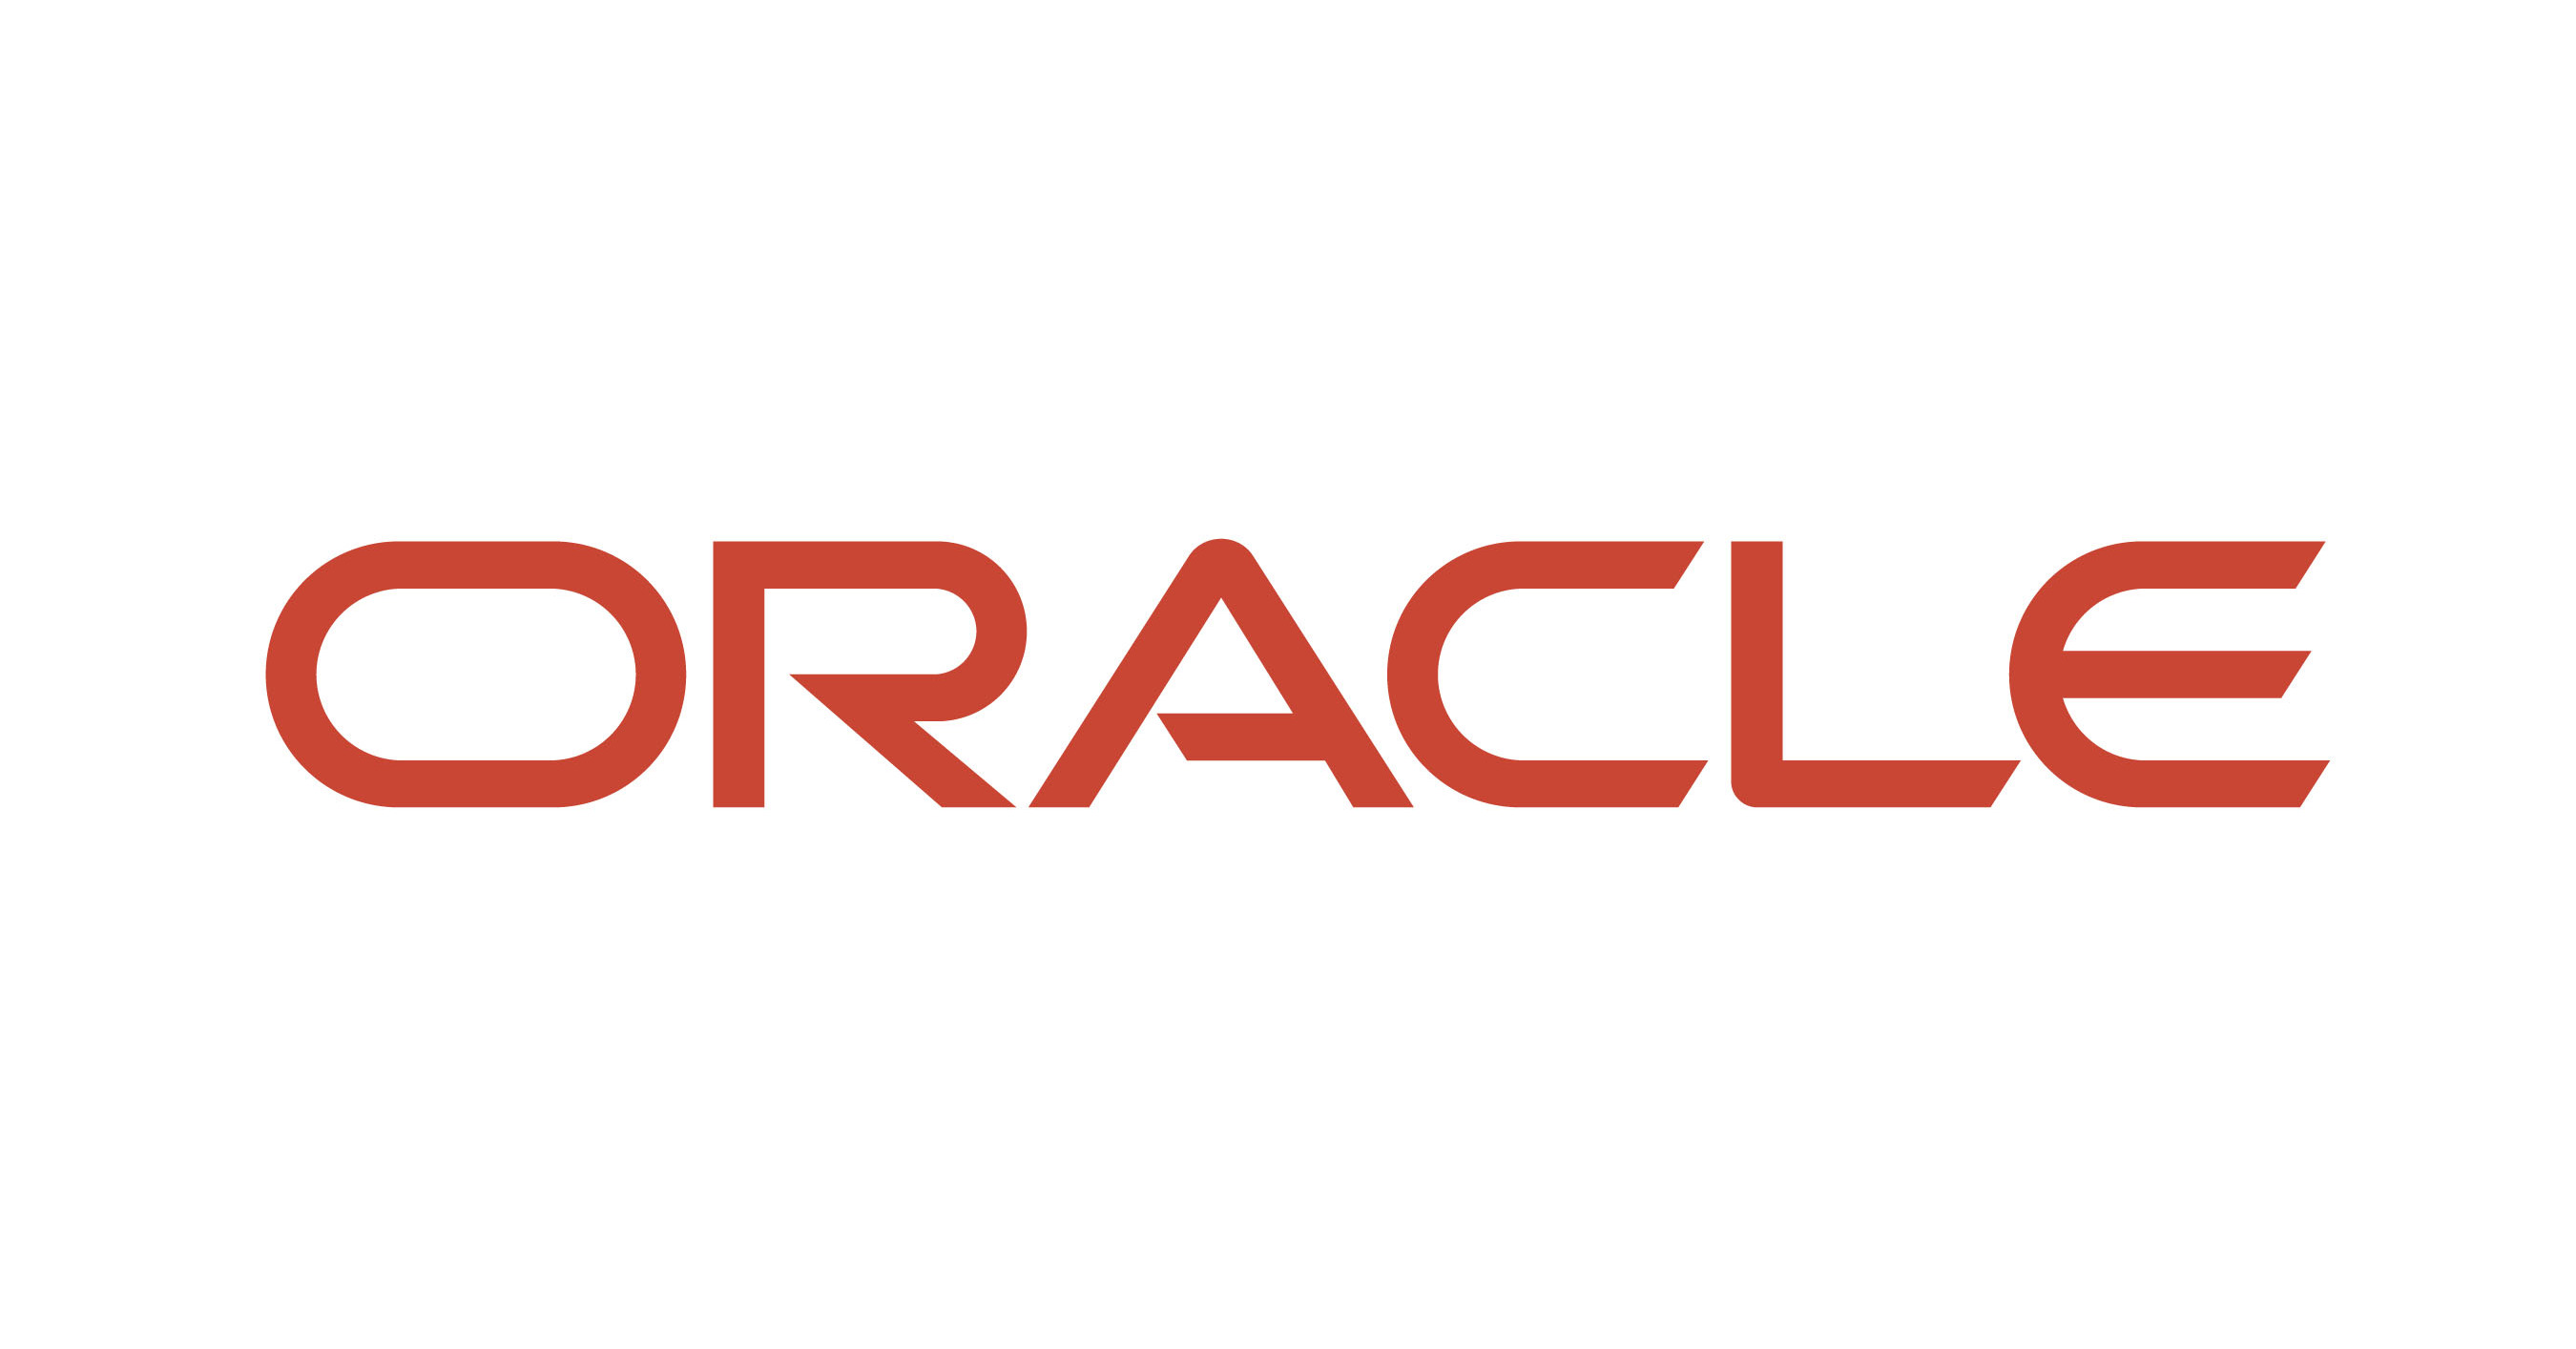 Oracle Systems Corporation